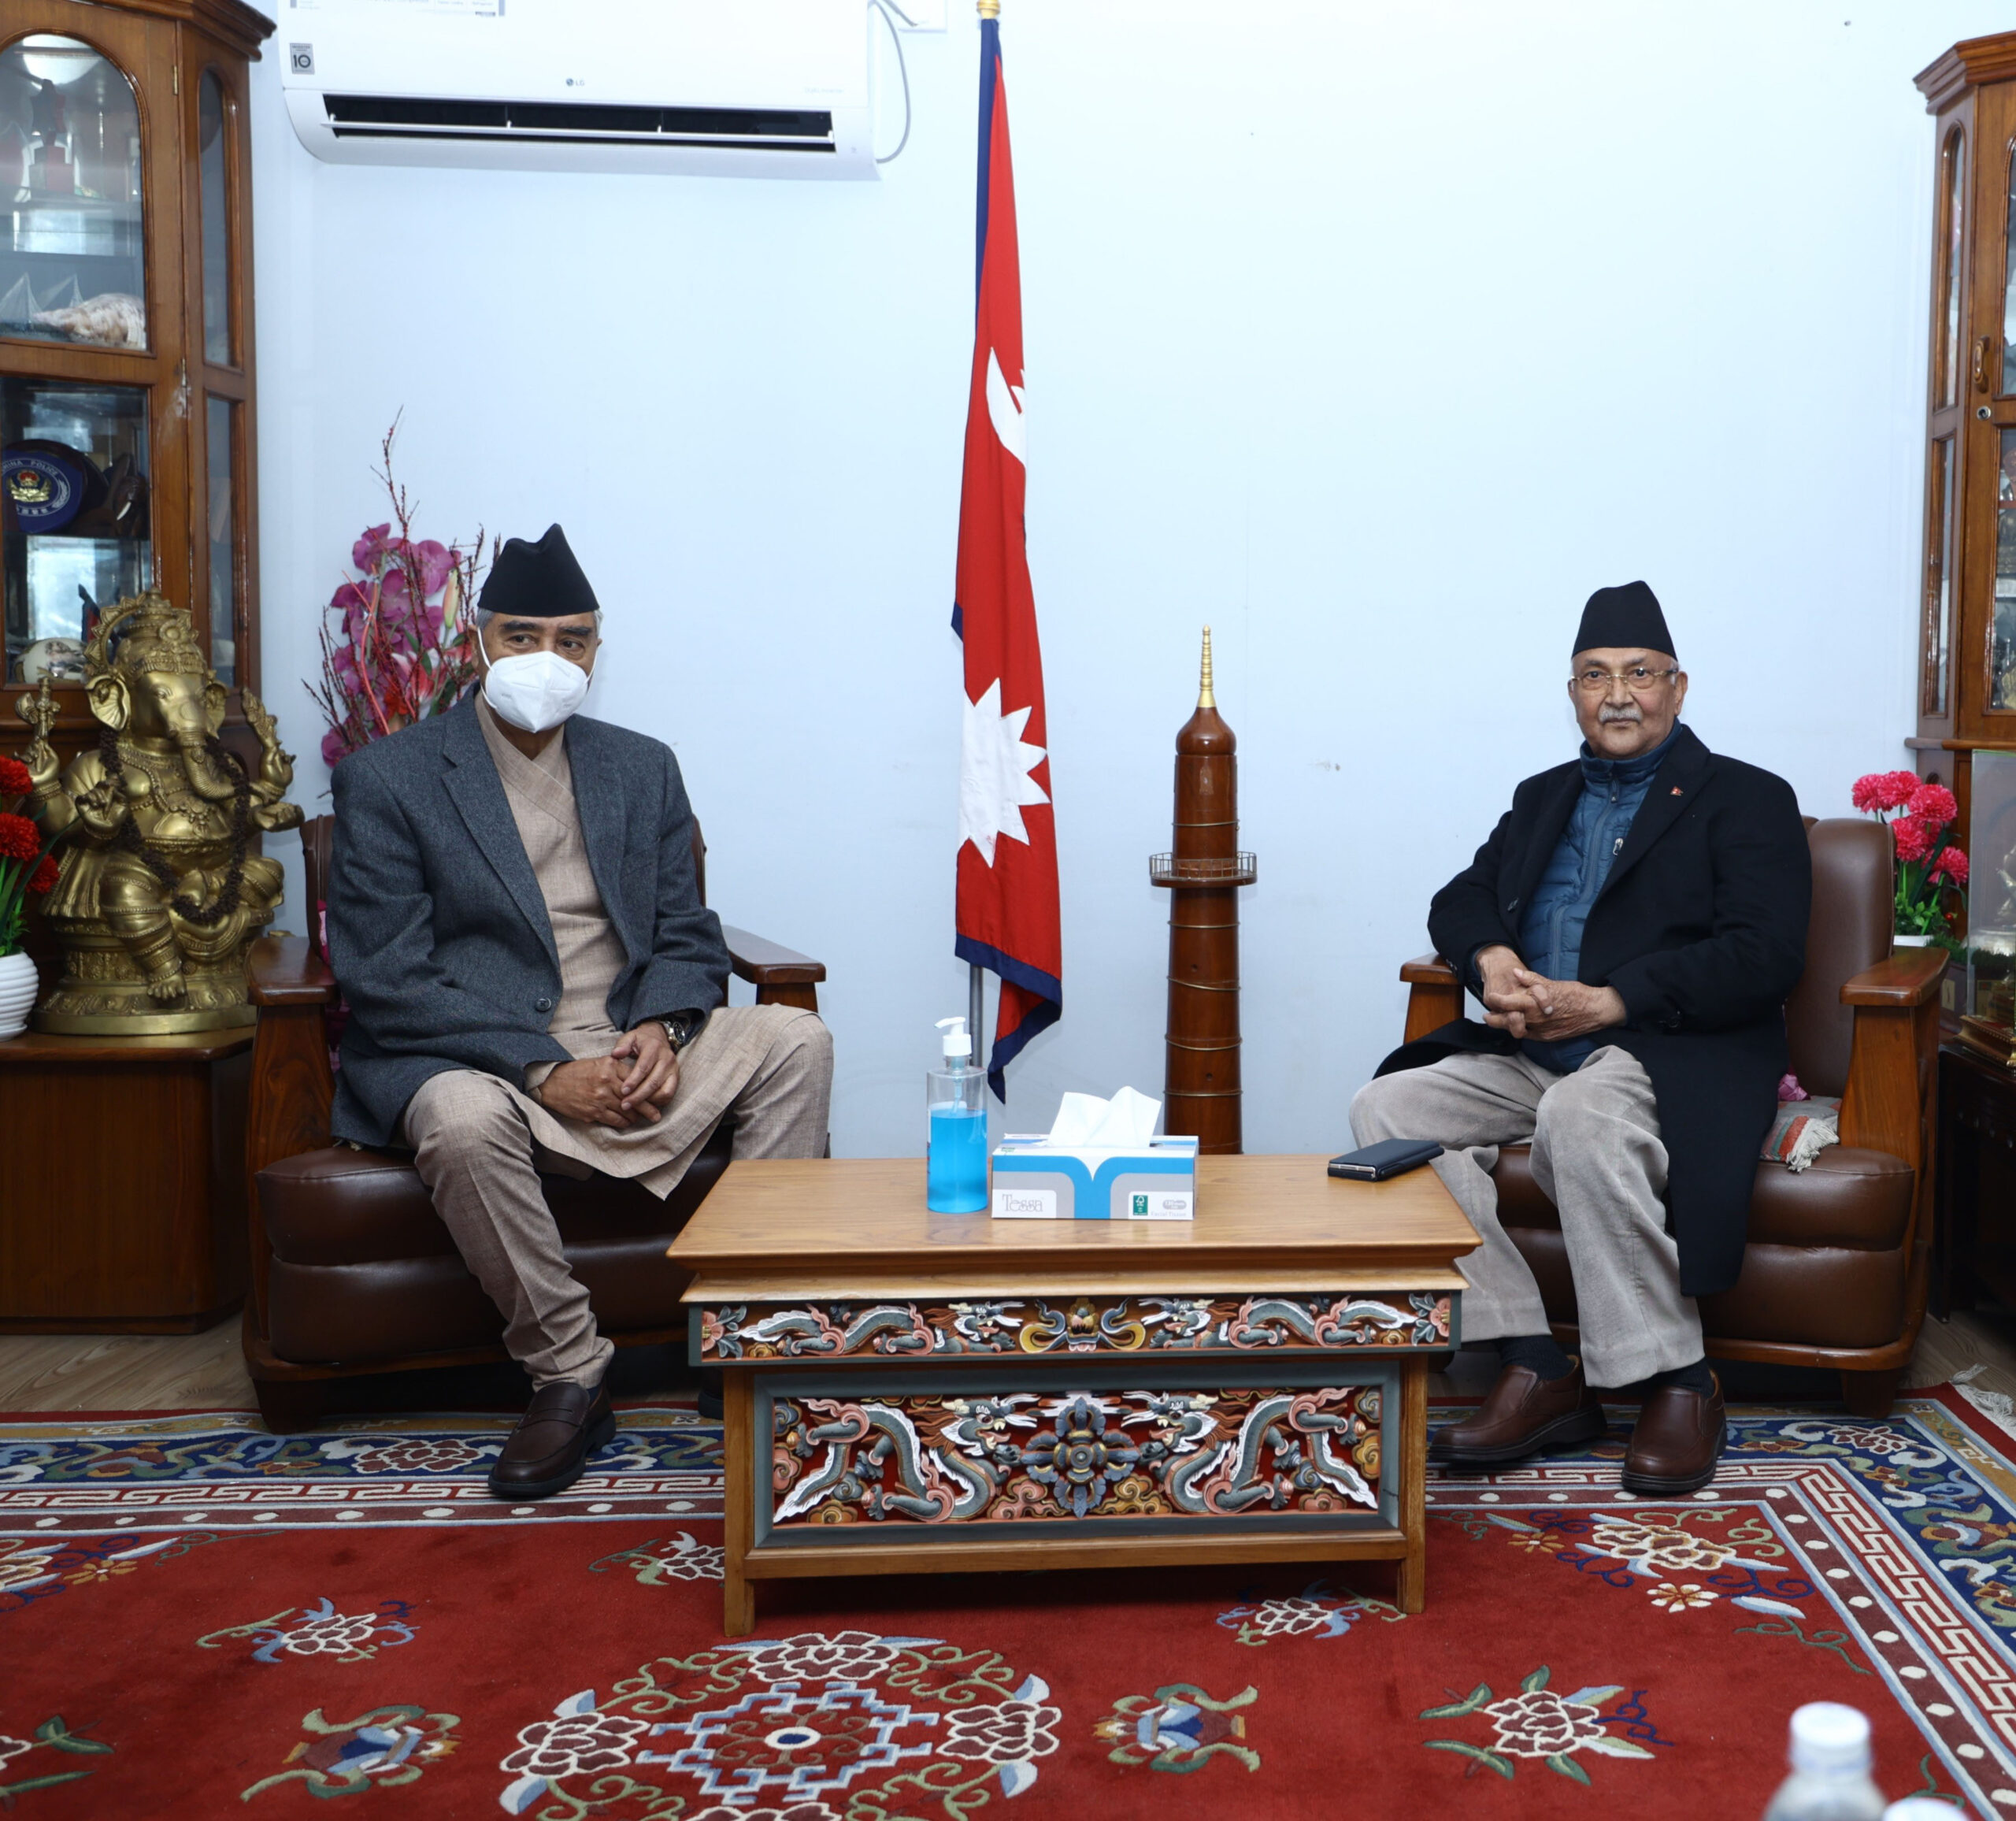 Talks between PM Deuba and UML Chairman Oli make no headway as Oli remains adamant to his stance